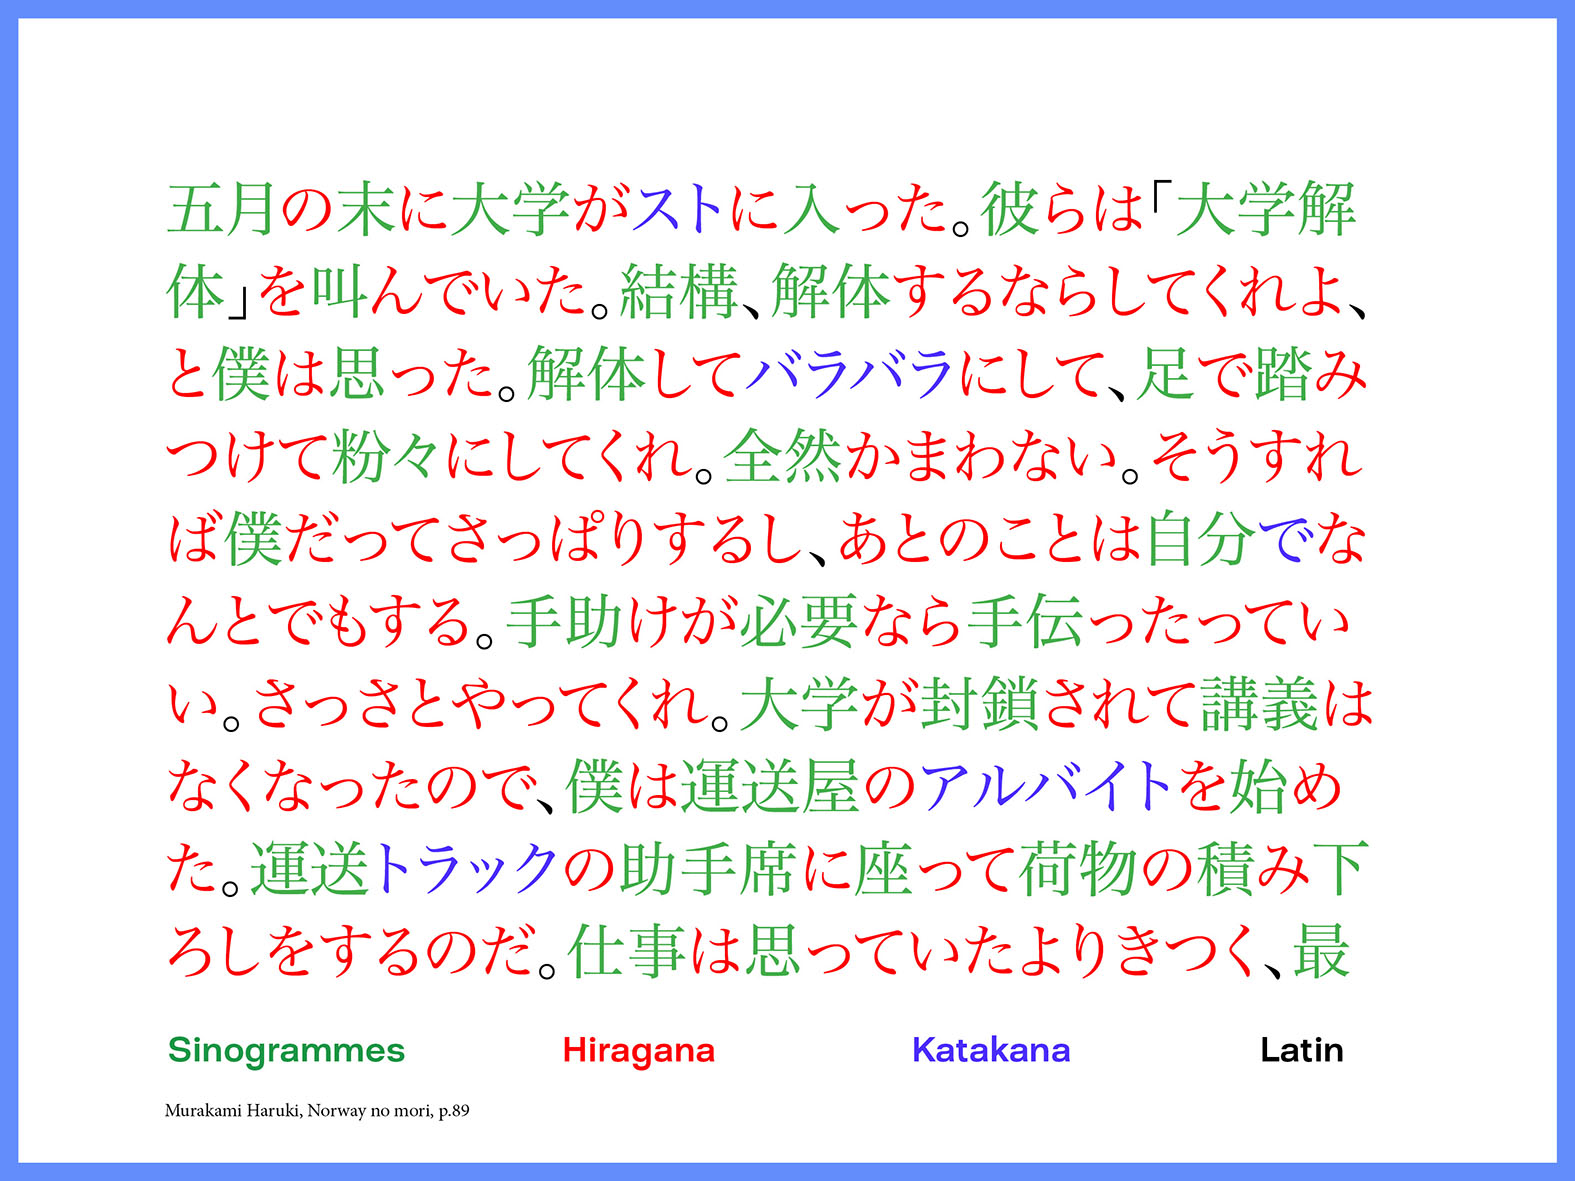 A is for Japanese typography: kilograms of sinograms